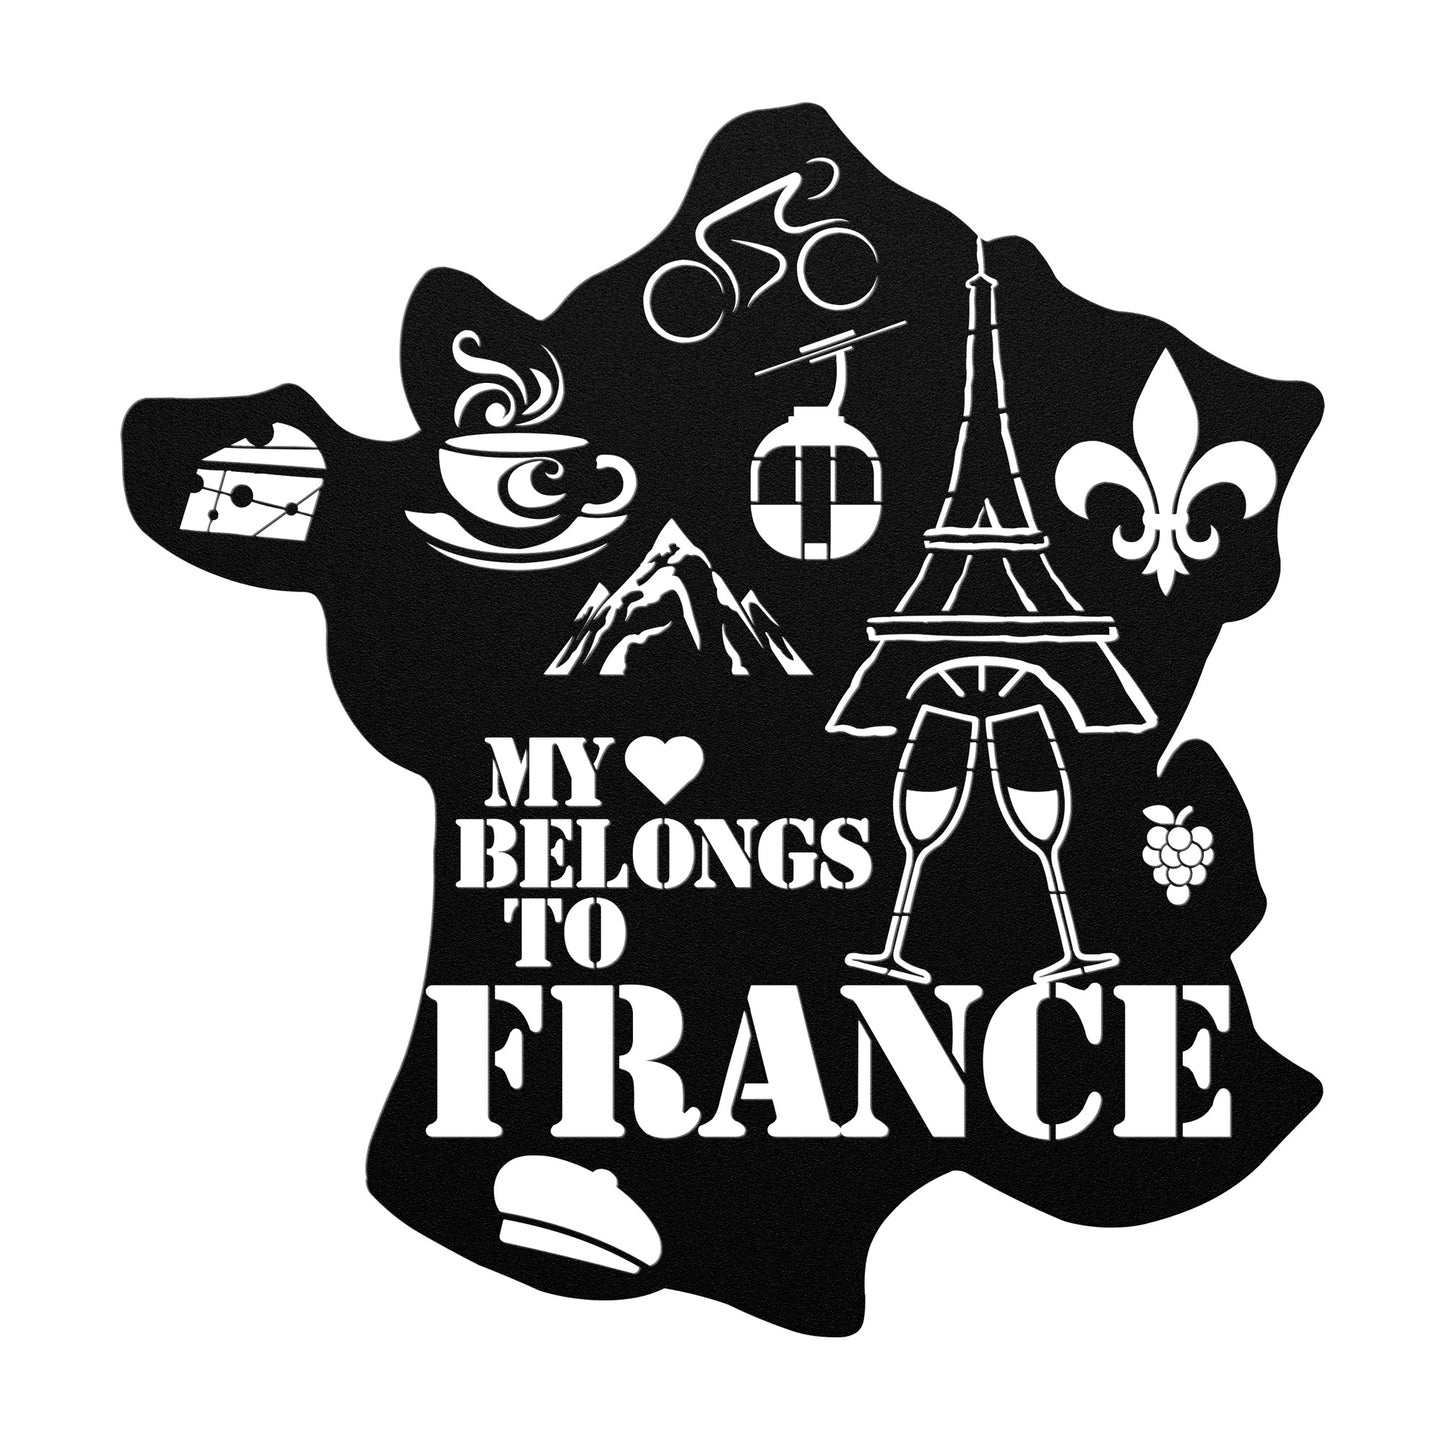 My Heart Belongs To France Metal Wall Art - Beautiful Metal Art Decor Piece To Remind You of Your Favorite Place to Travel and Visit